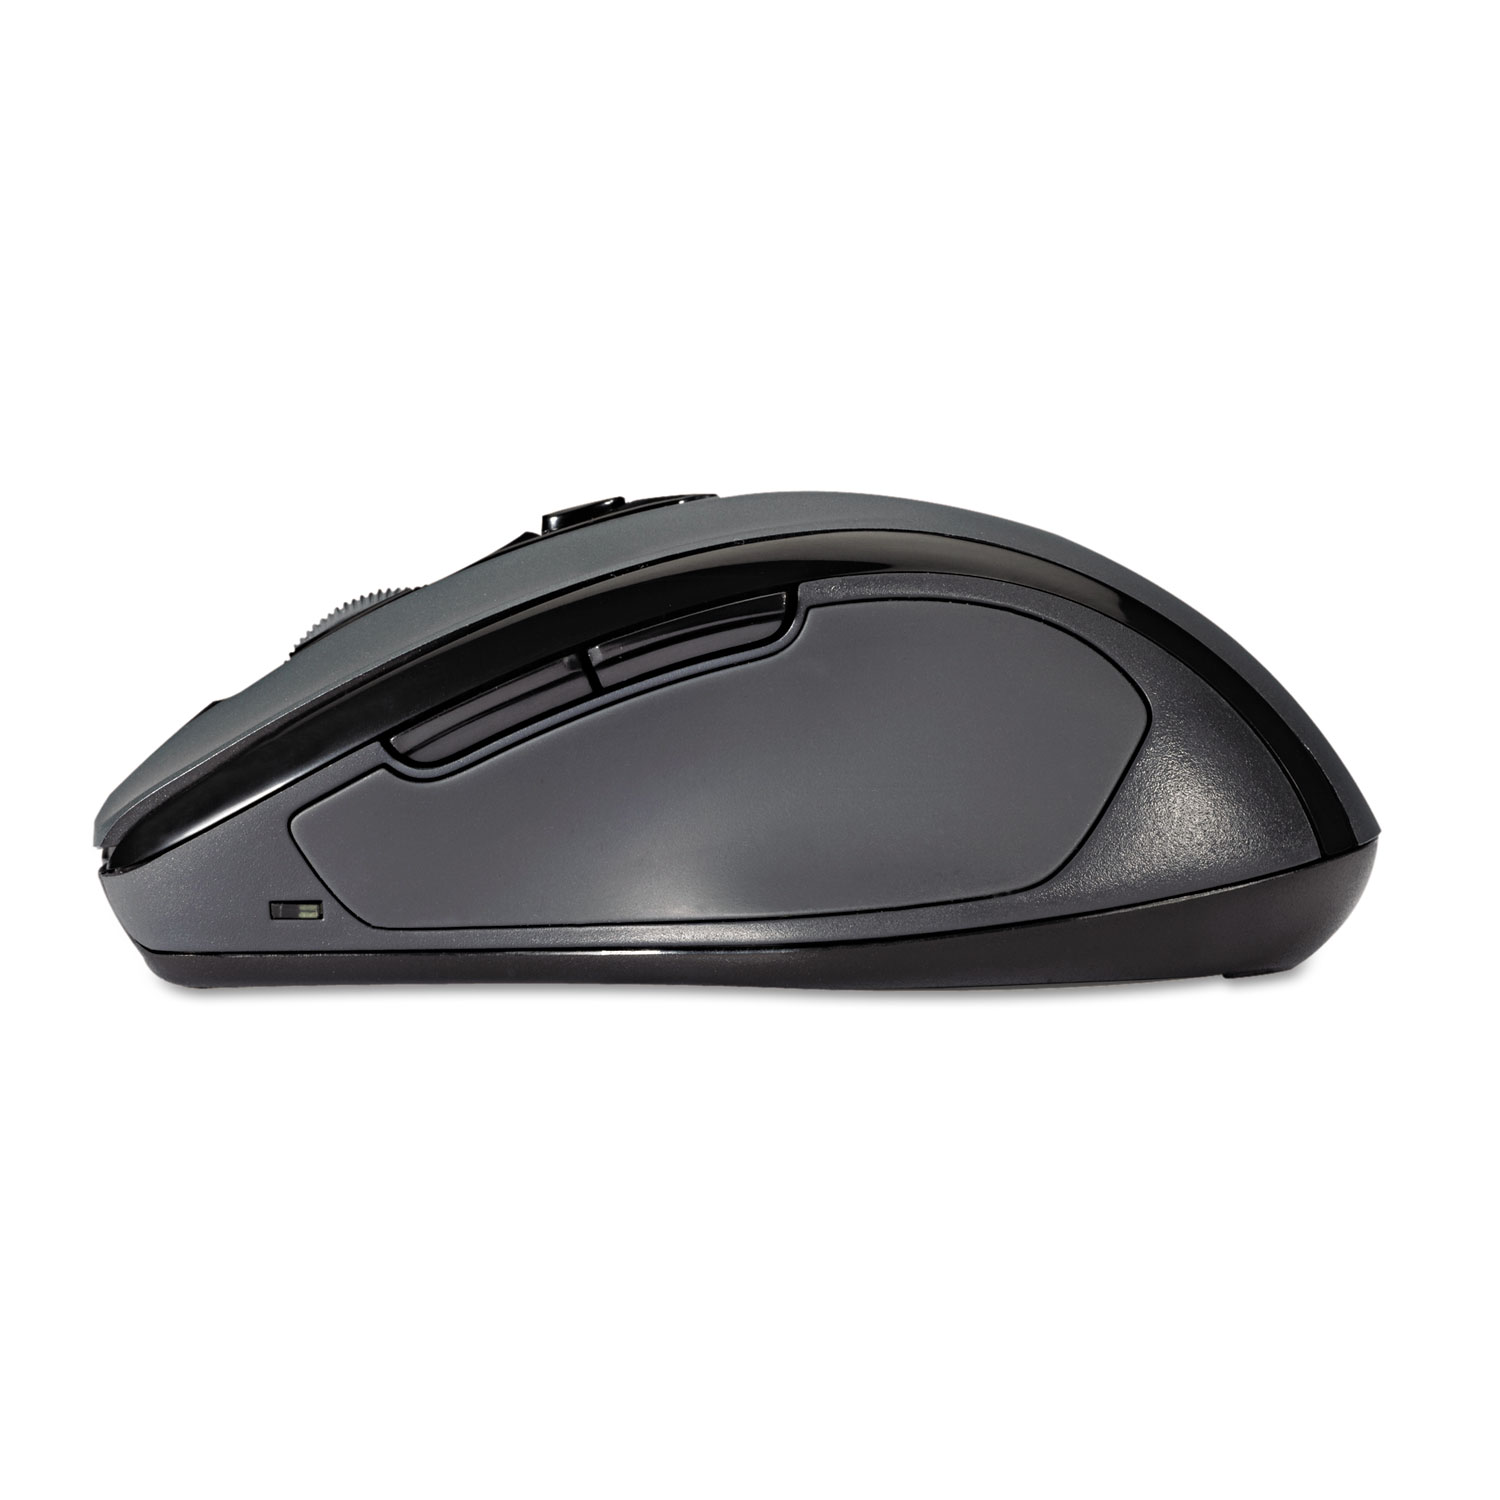 Pro Fit Mid-Size Wireless Mouse, Right, Windows, Gray